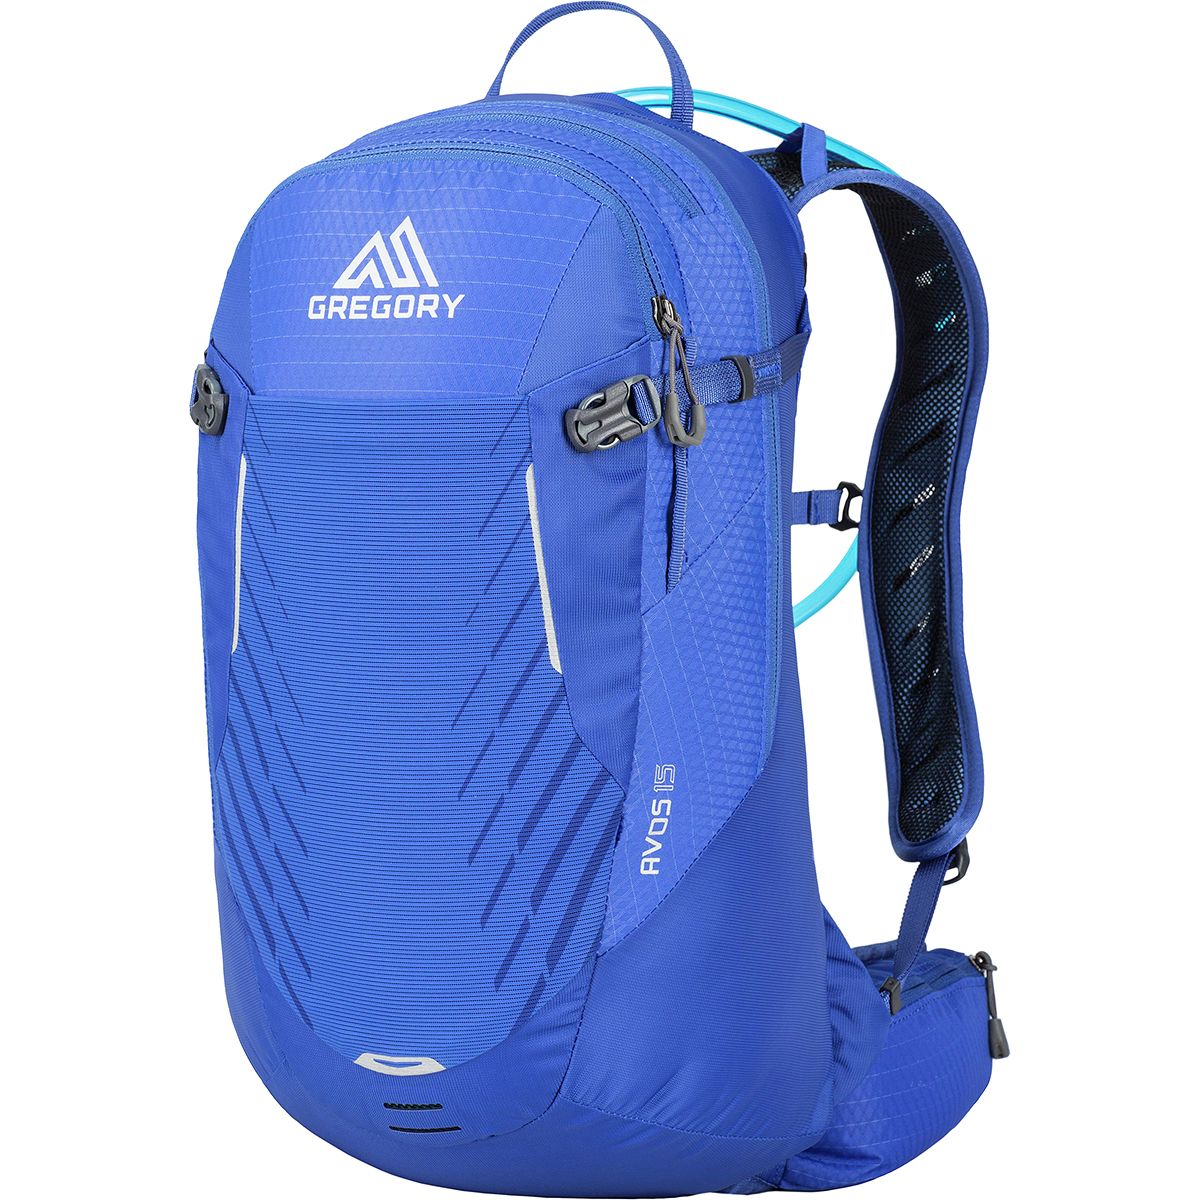 Photos - Backpack Gregory Avos 15L Hydration  - Women's 